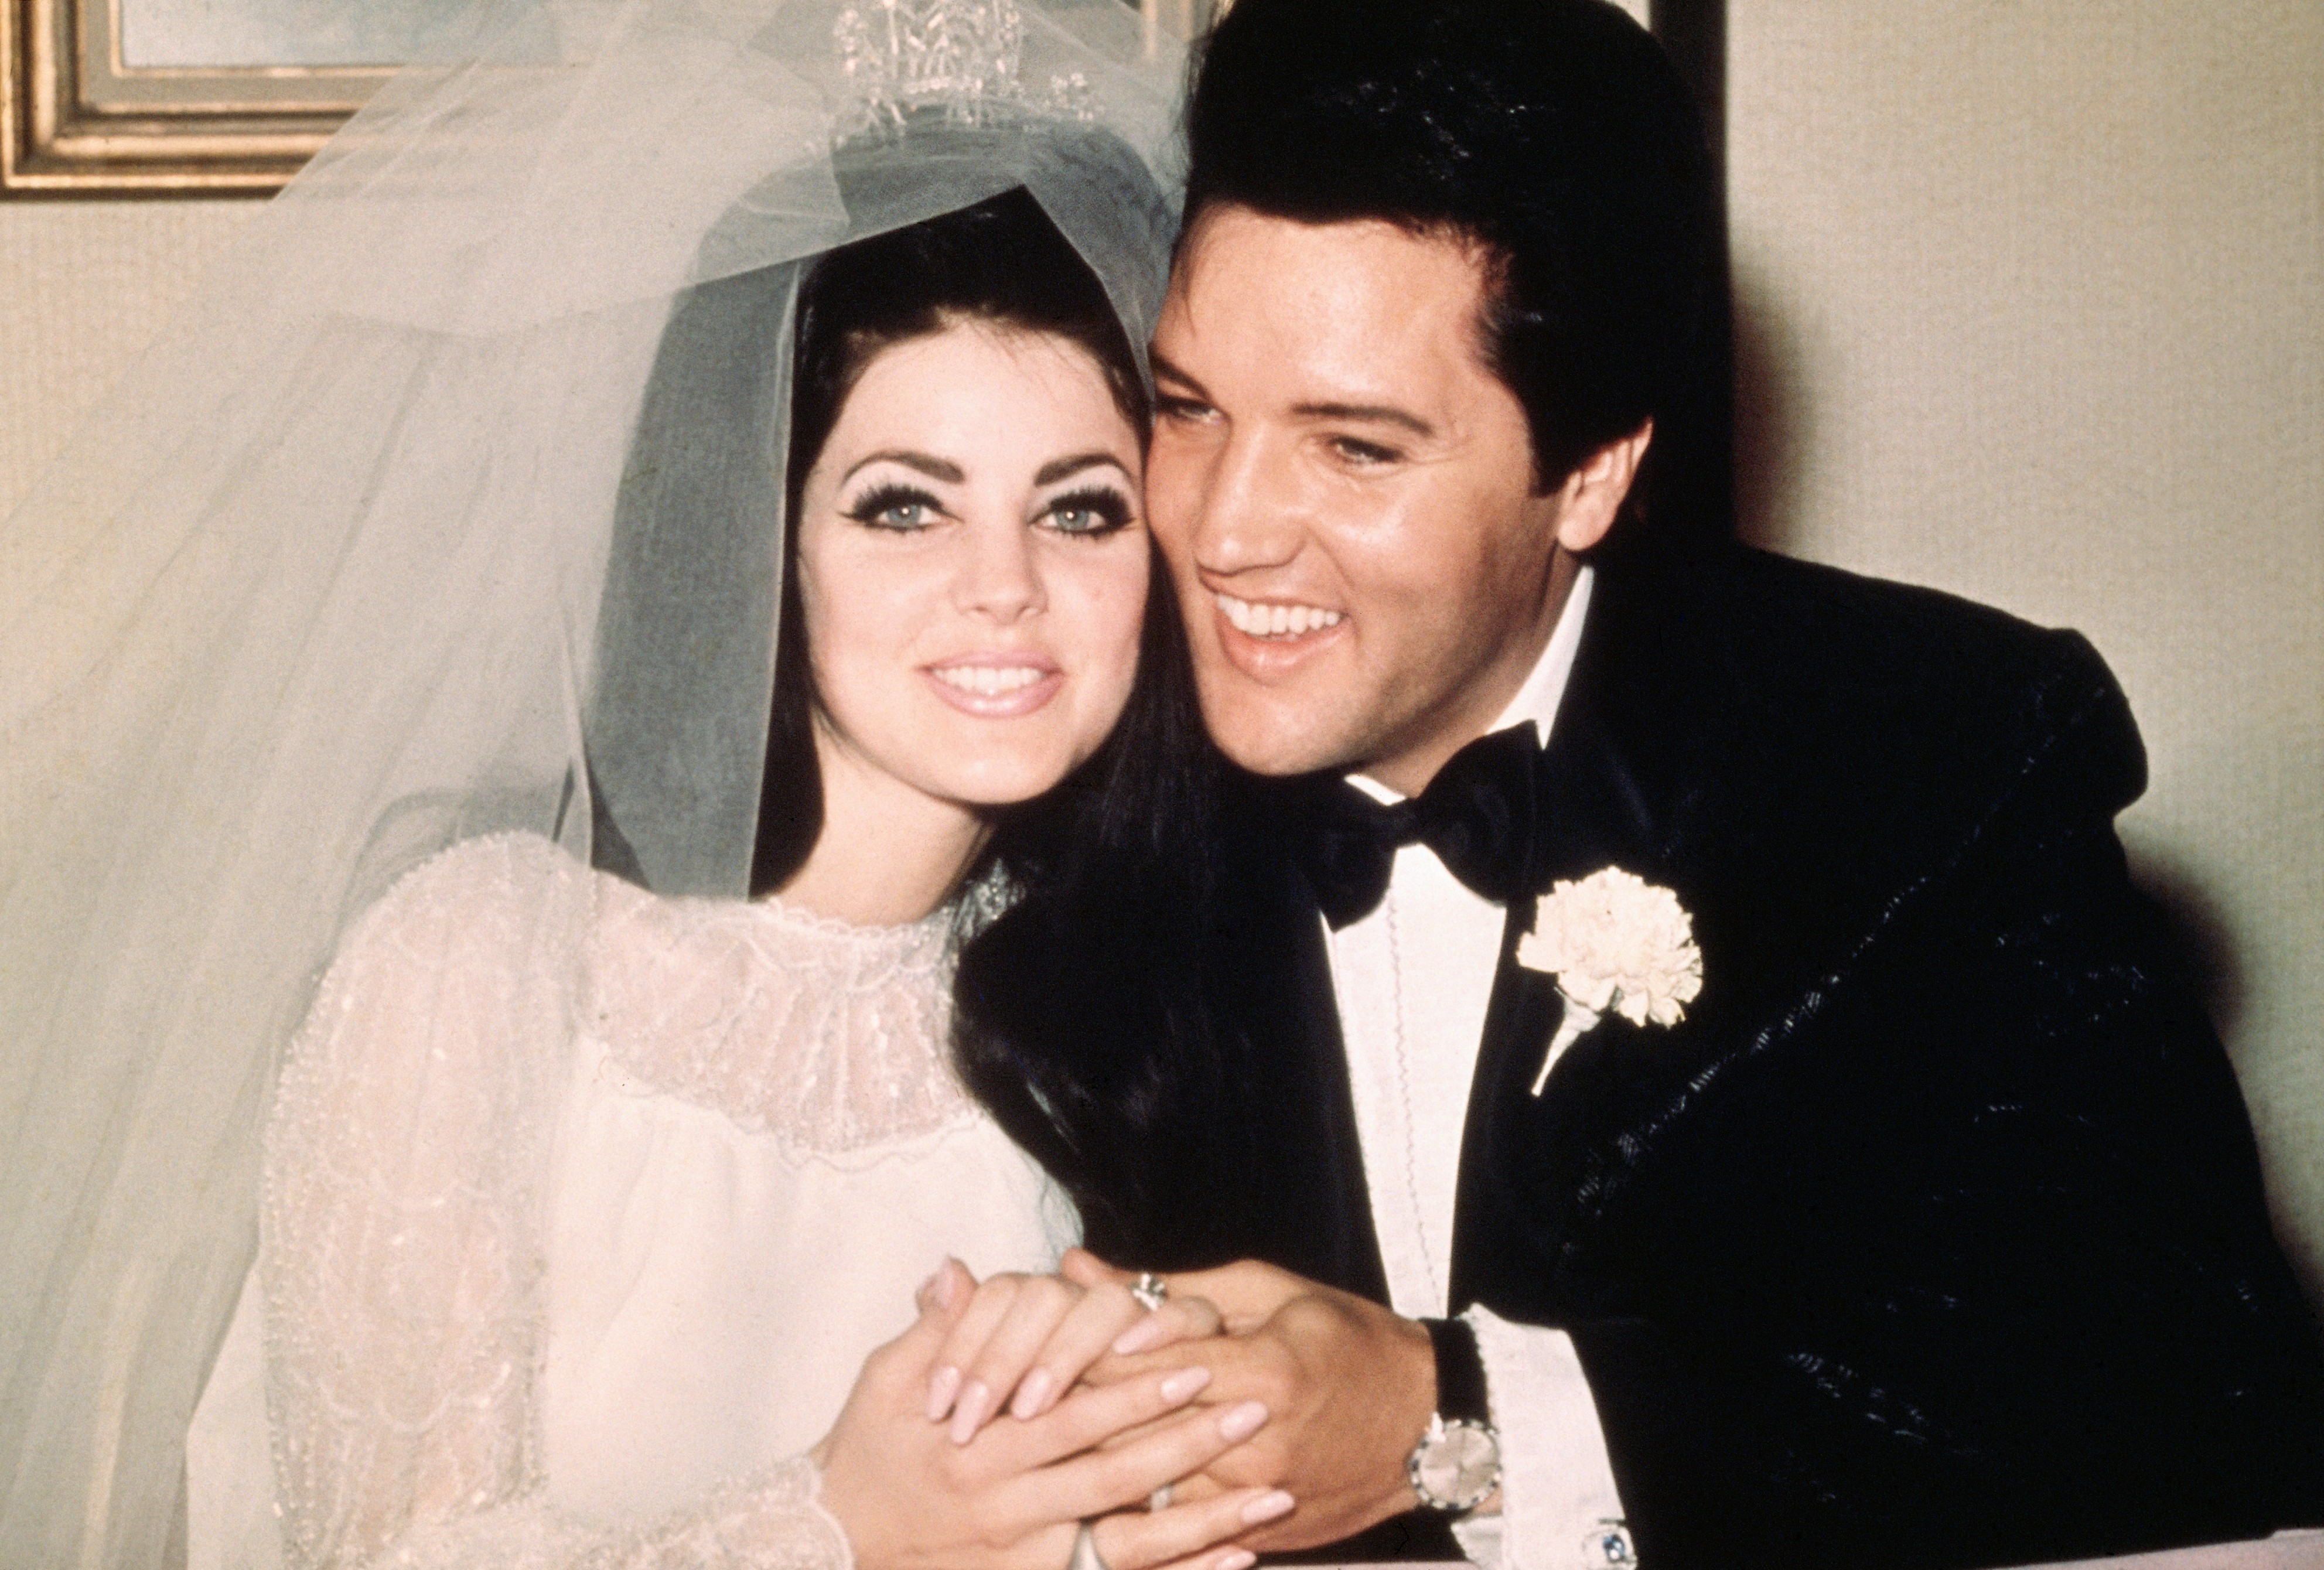 Priscilla Presley's most iconic outfits